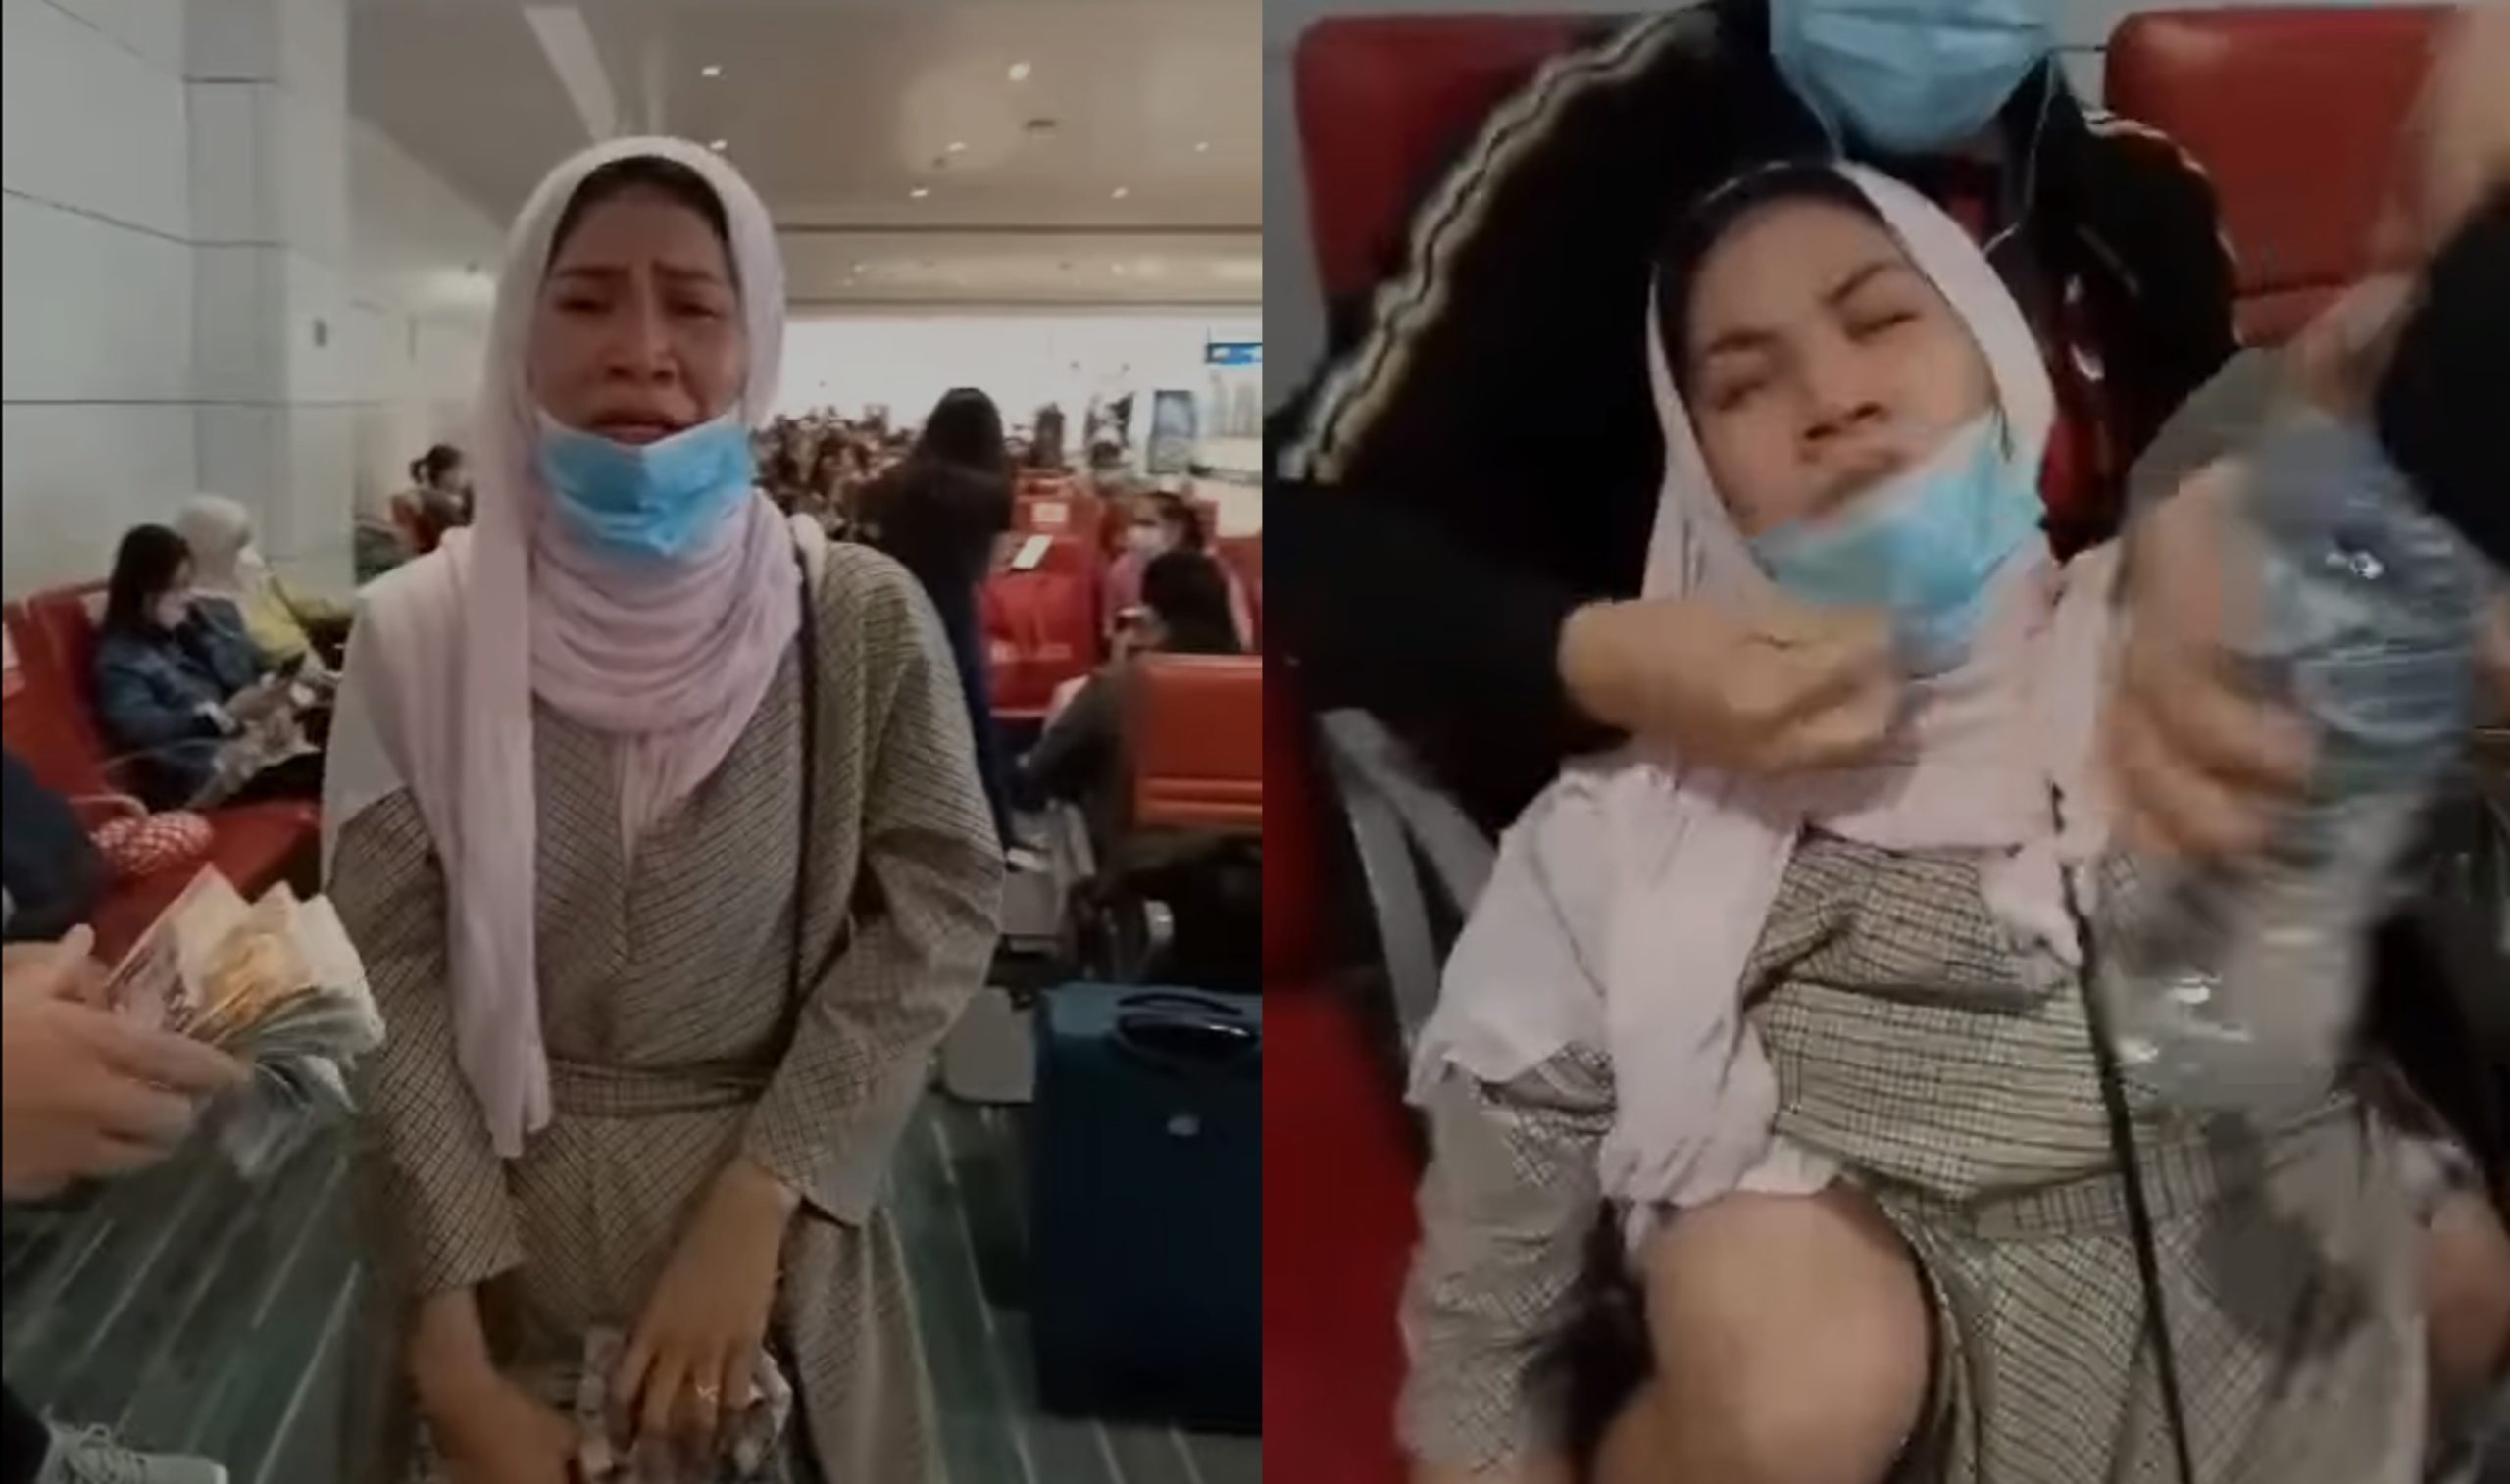 Video Cash Ted By Dubai Ofws To Pinay Who Fainted At Dxb Stolen In Quarantine Hotel The